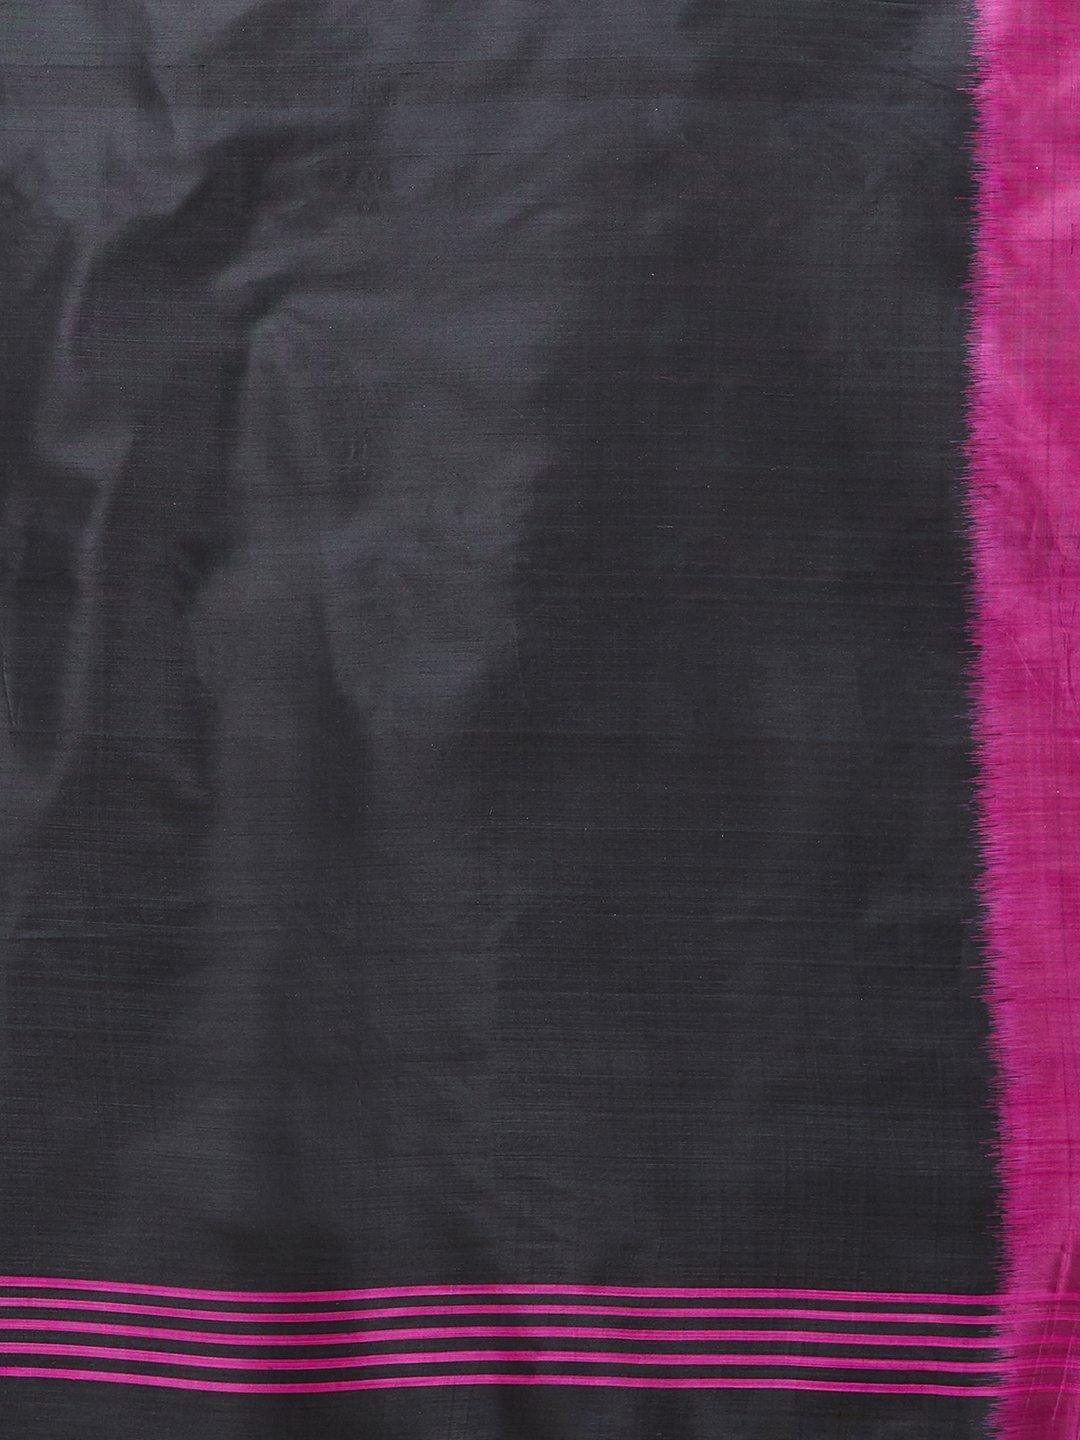 CraftsCollection.in -Black and Pink Pure Silk Stole